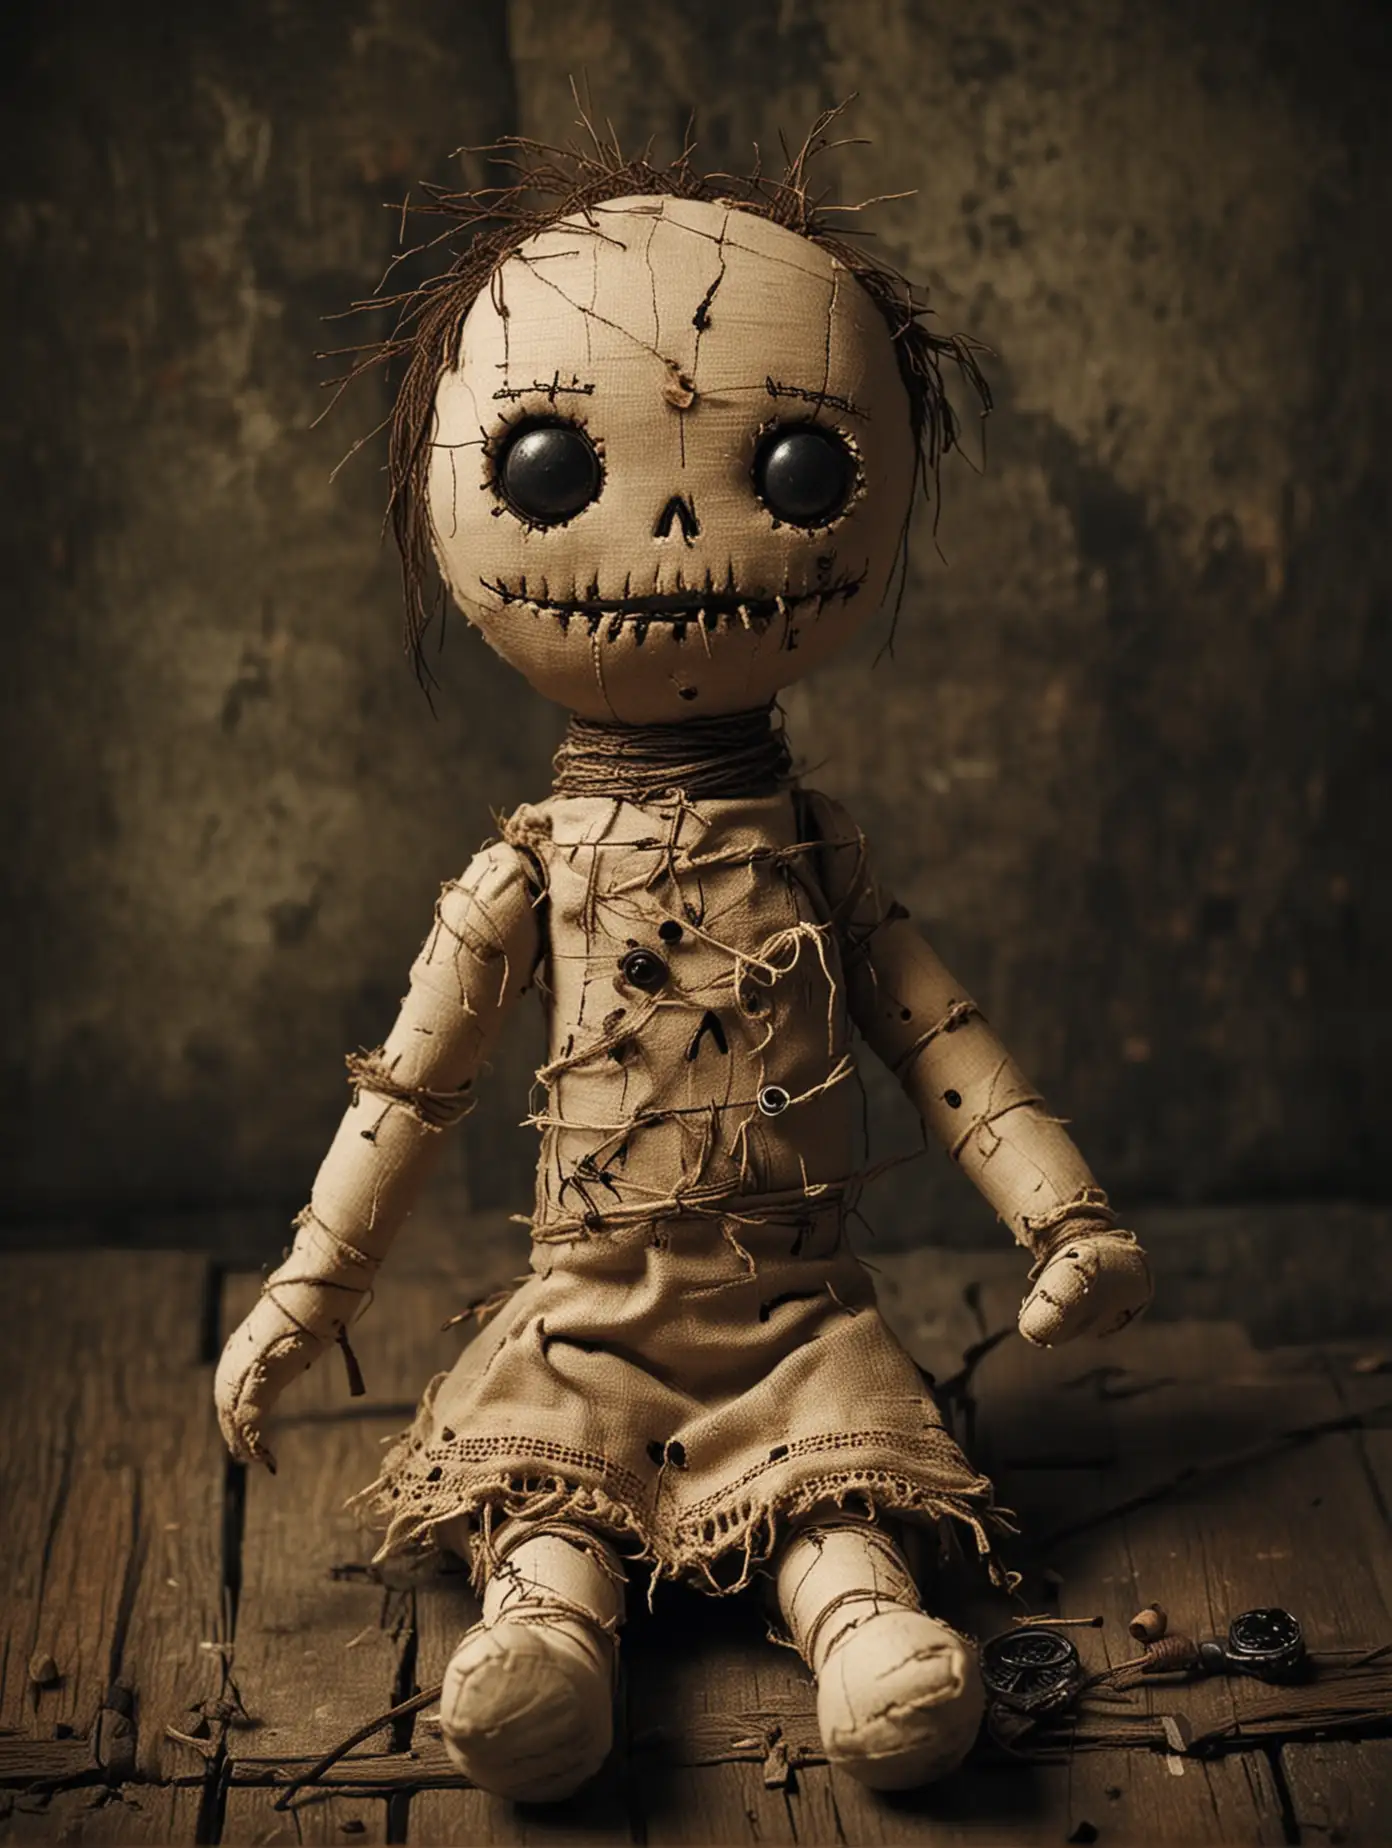 Creepy Voodoo Doll with Mystical Symbols and Dark Background